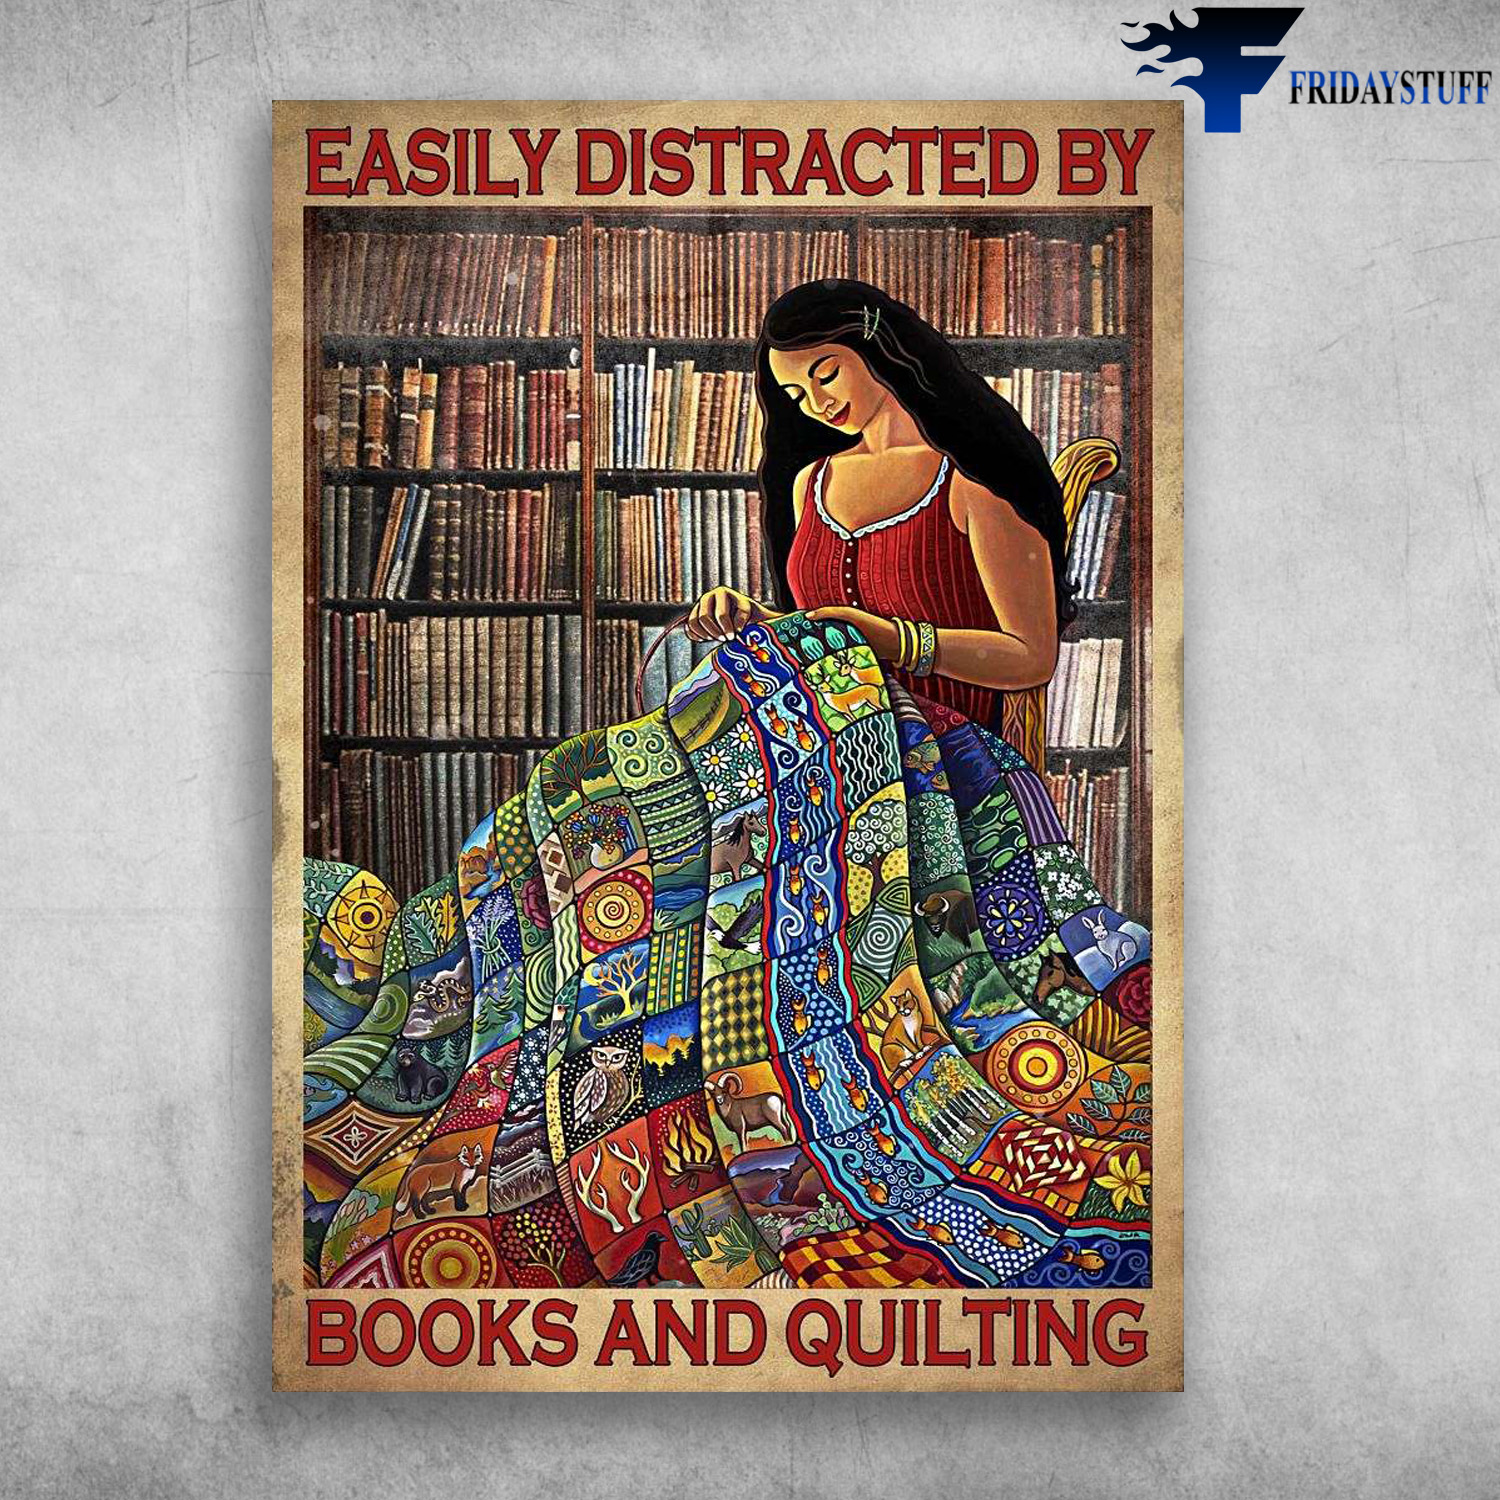 https://fridaystuff.com/wp-content/uploads/2021/06/Lady-Quilting-Easily-Distracted-By-Books-And-Quilting.jpg